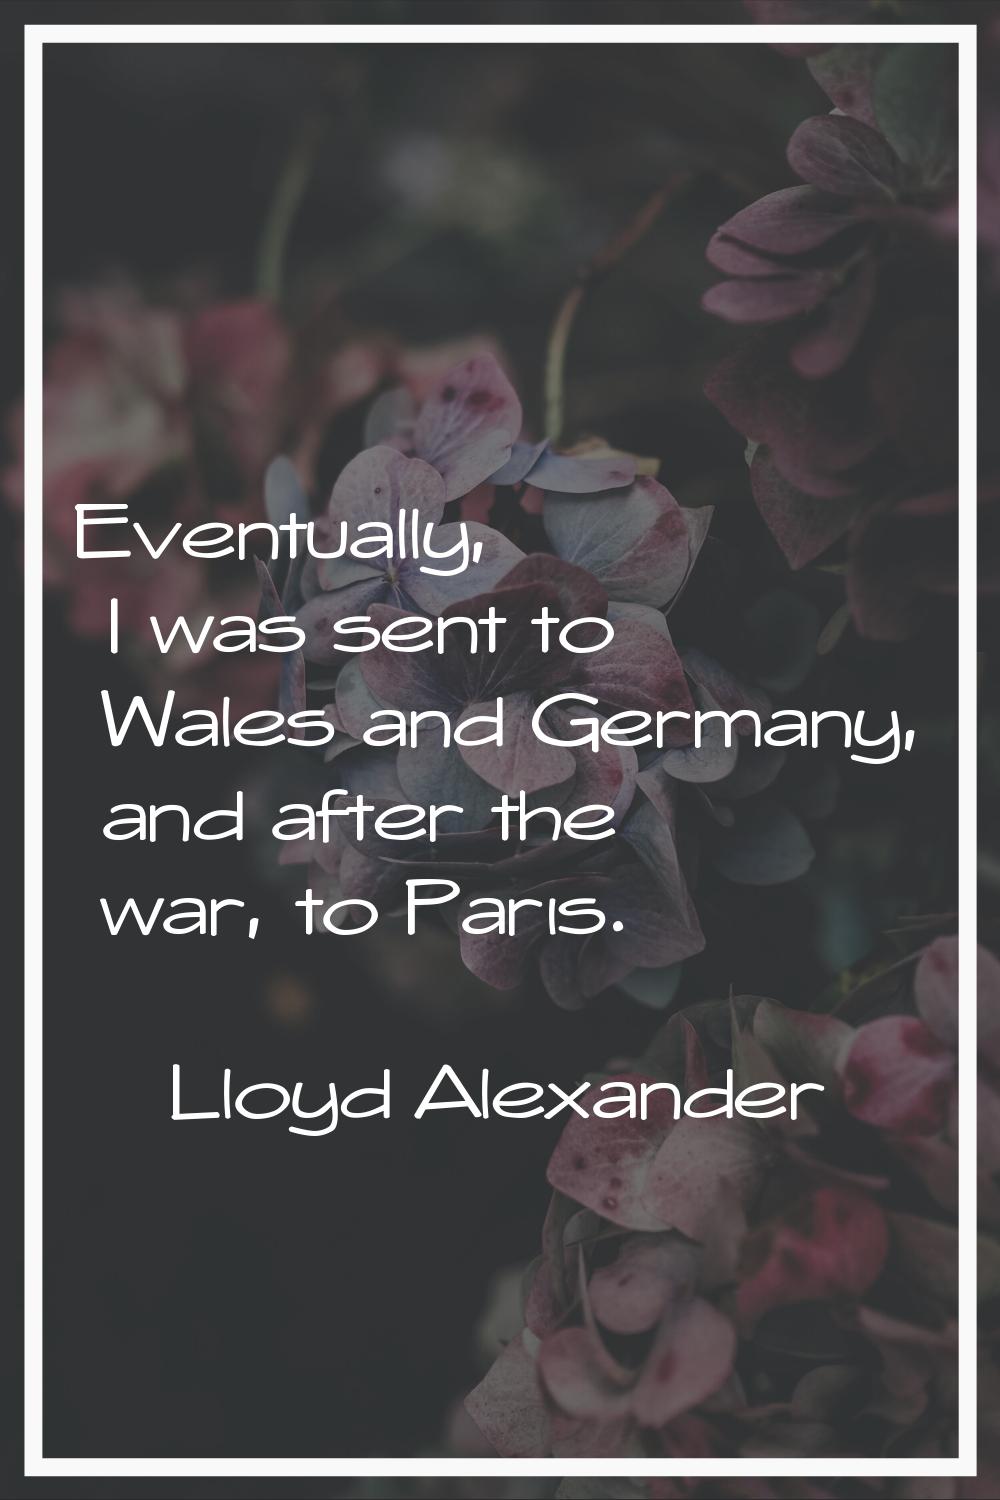 Eventually, I was sent to Wales and Germany, and after the war, to Paris.